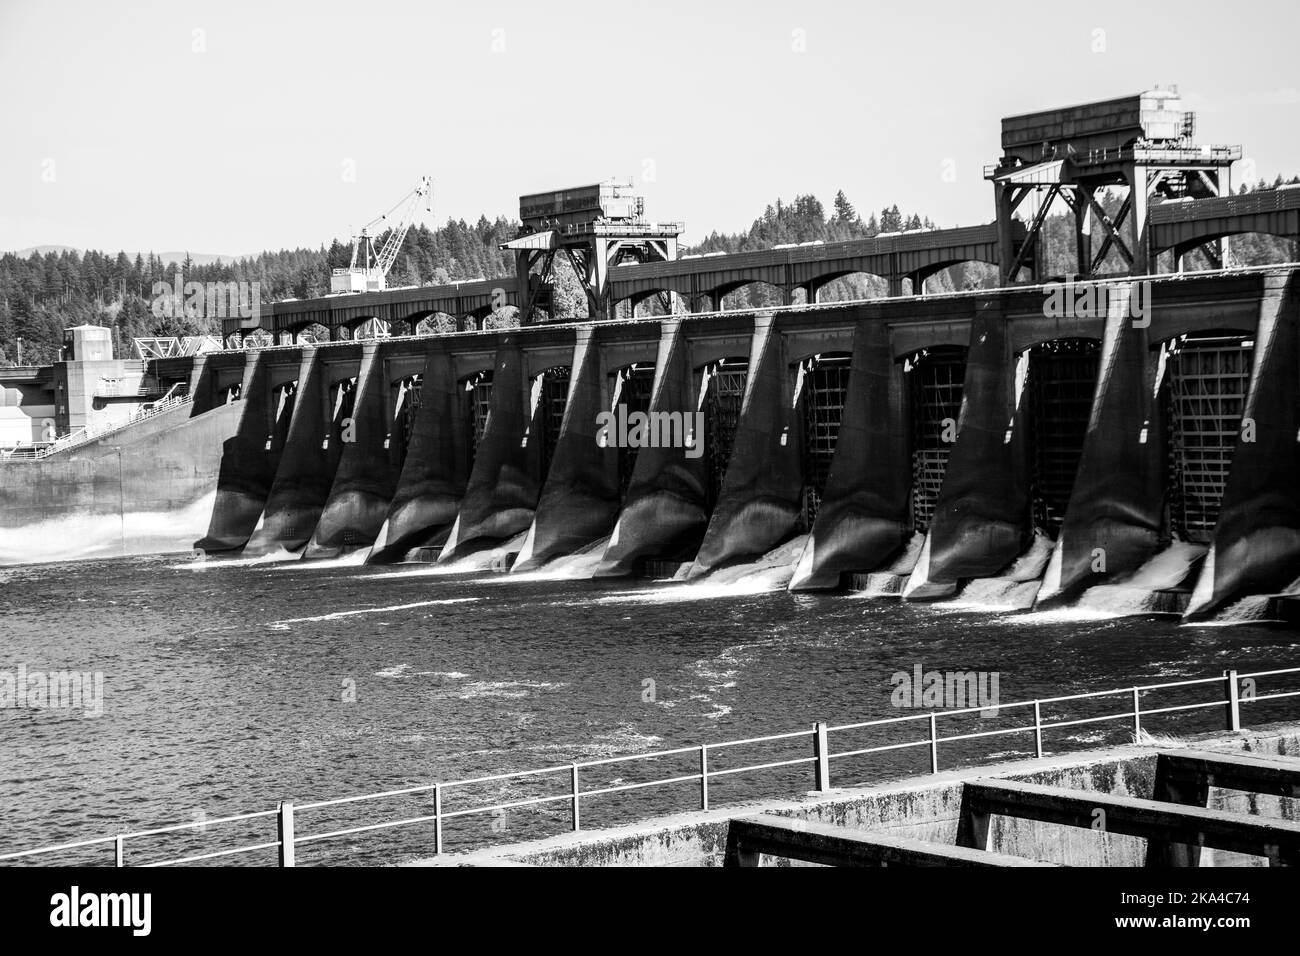 View of Bonneville Dam that crosses the Columbia River between Washington and Oregon.  Built by the United States Army Corps of Engineers. Stock Photo